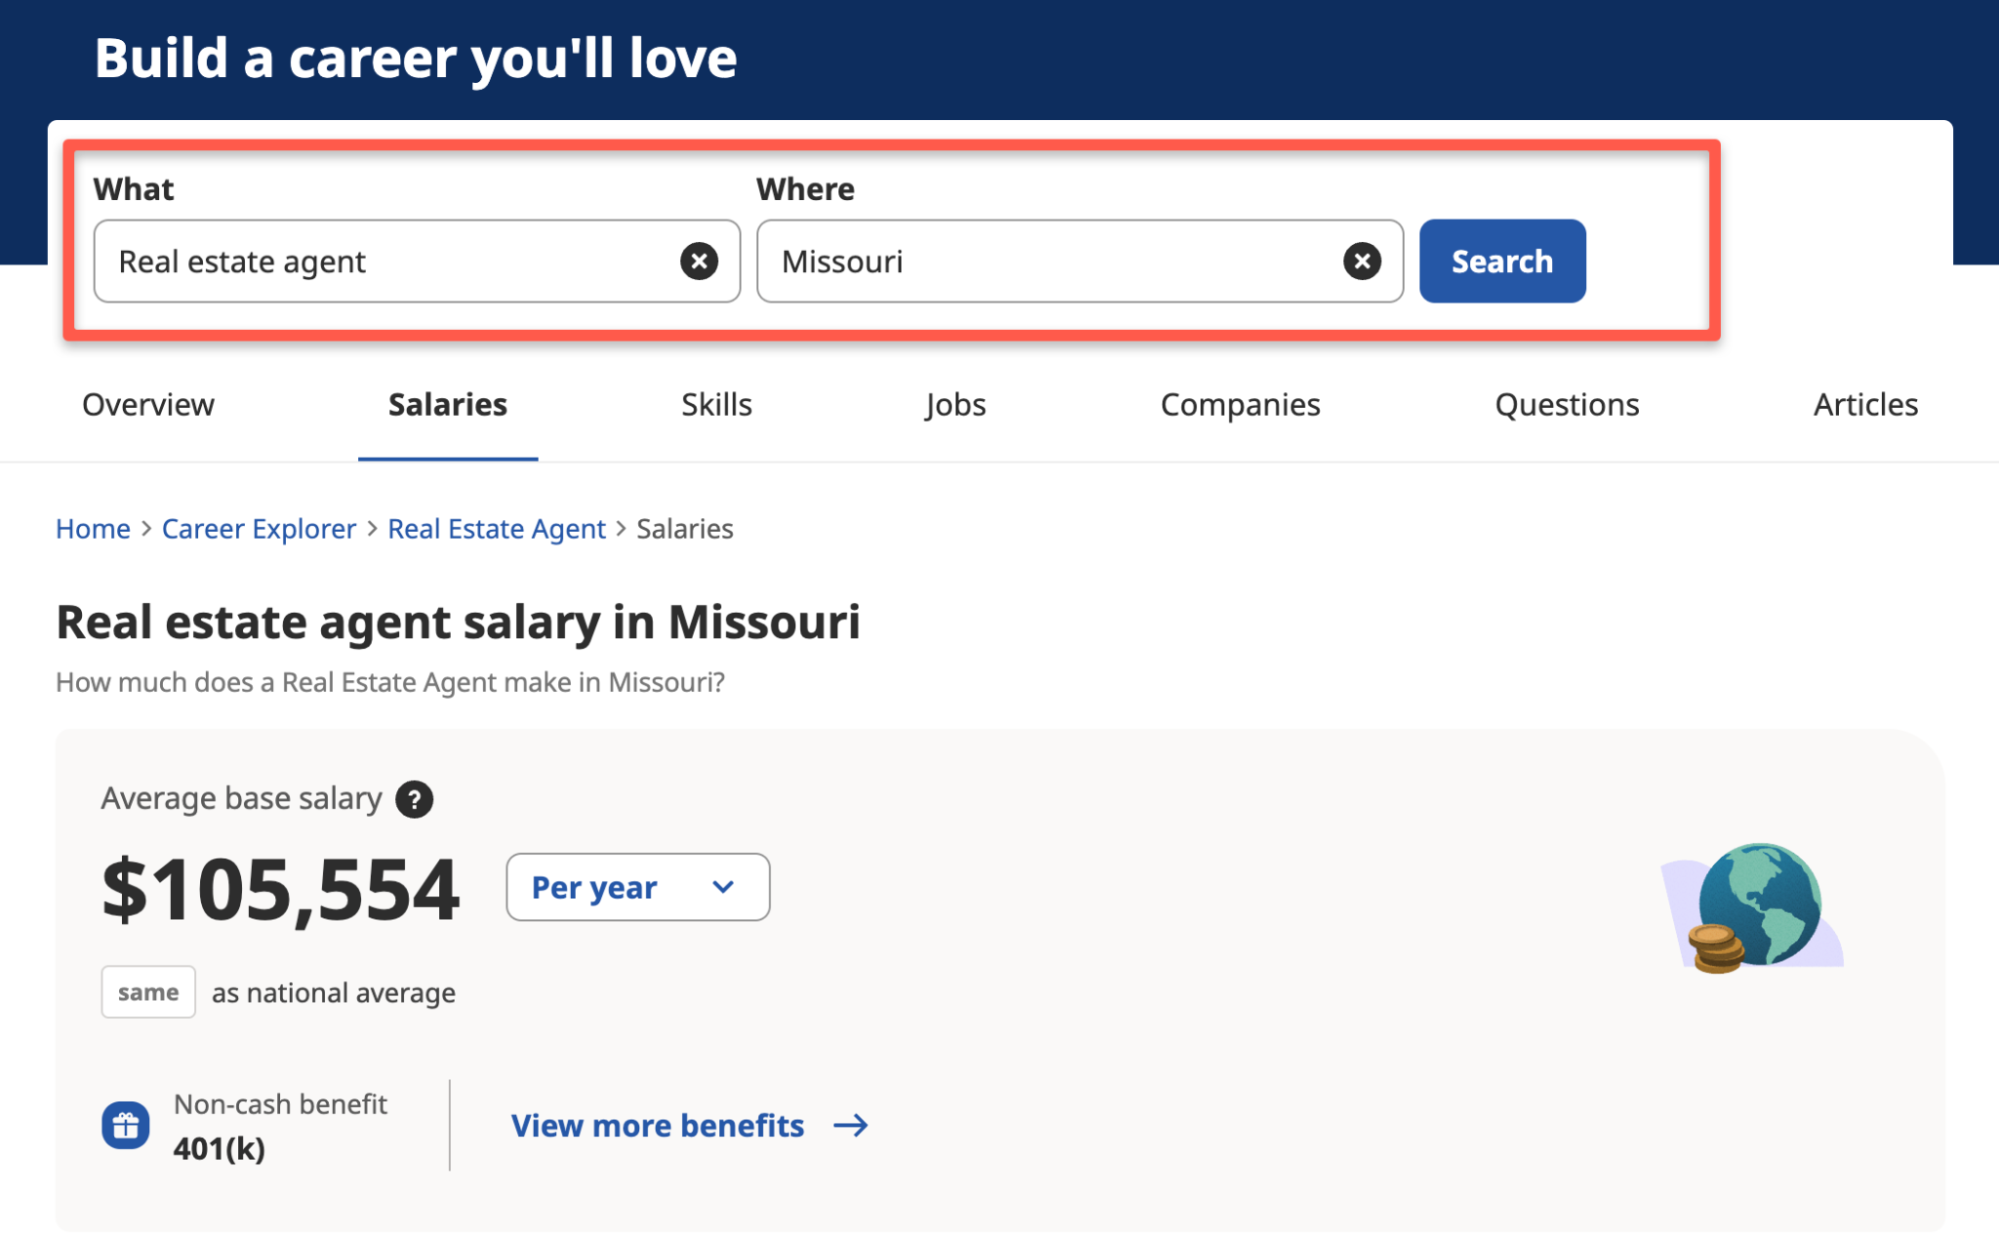 Salary information for real estate agents in Missouri.